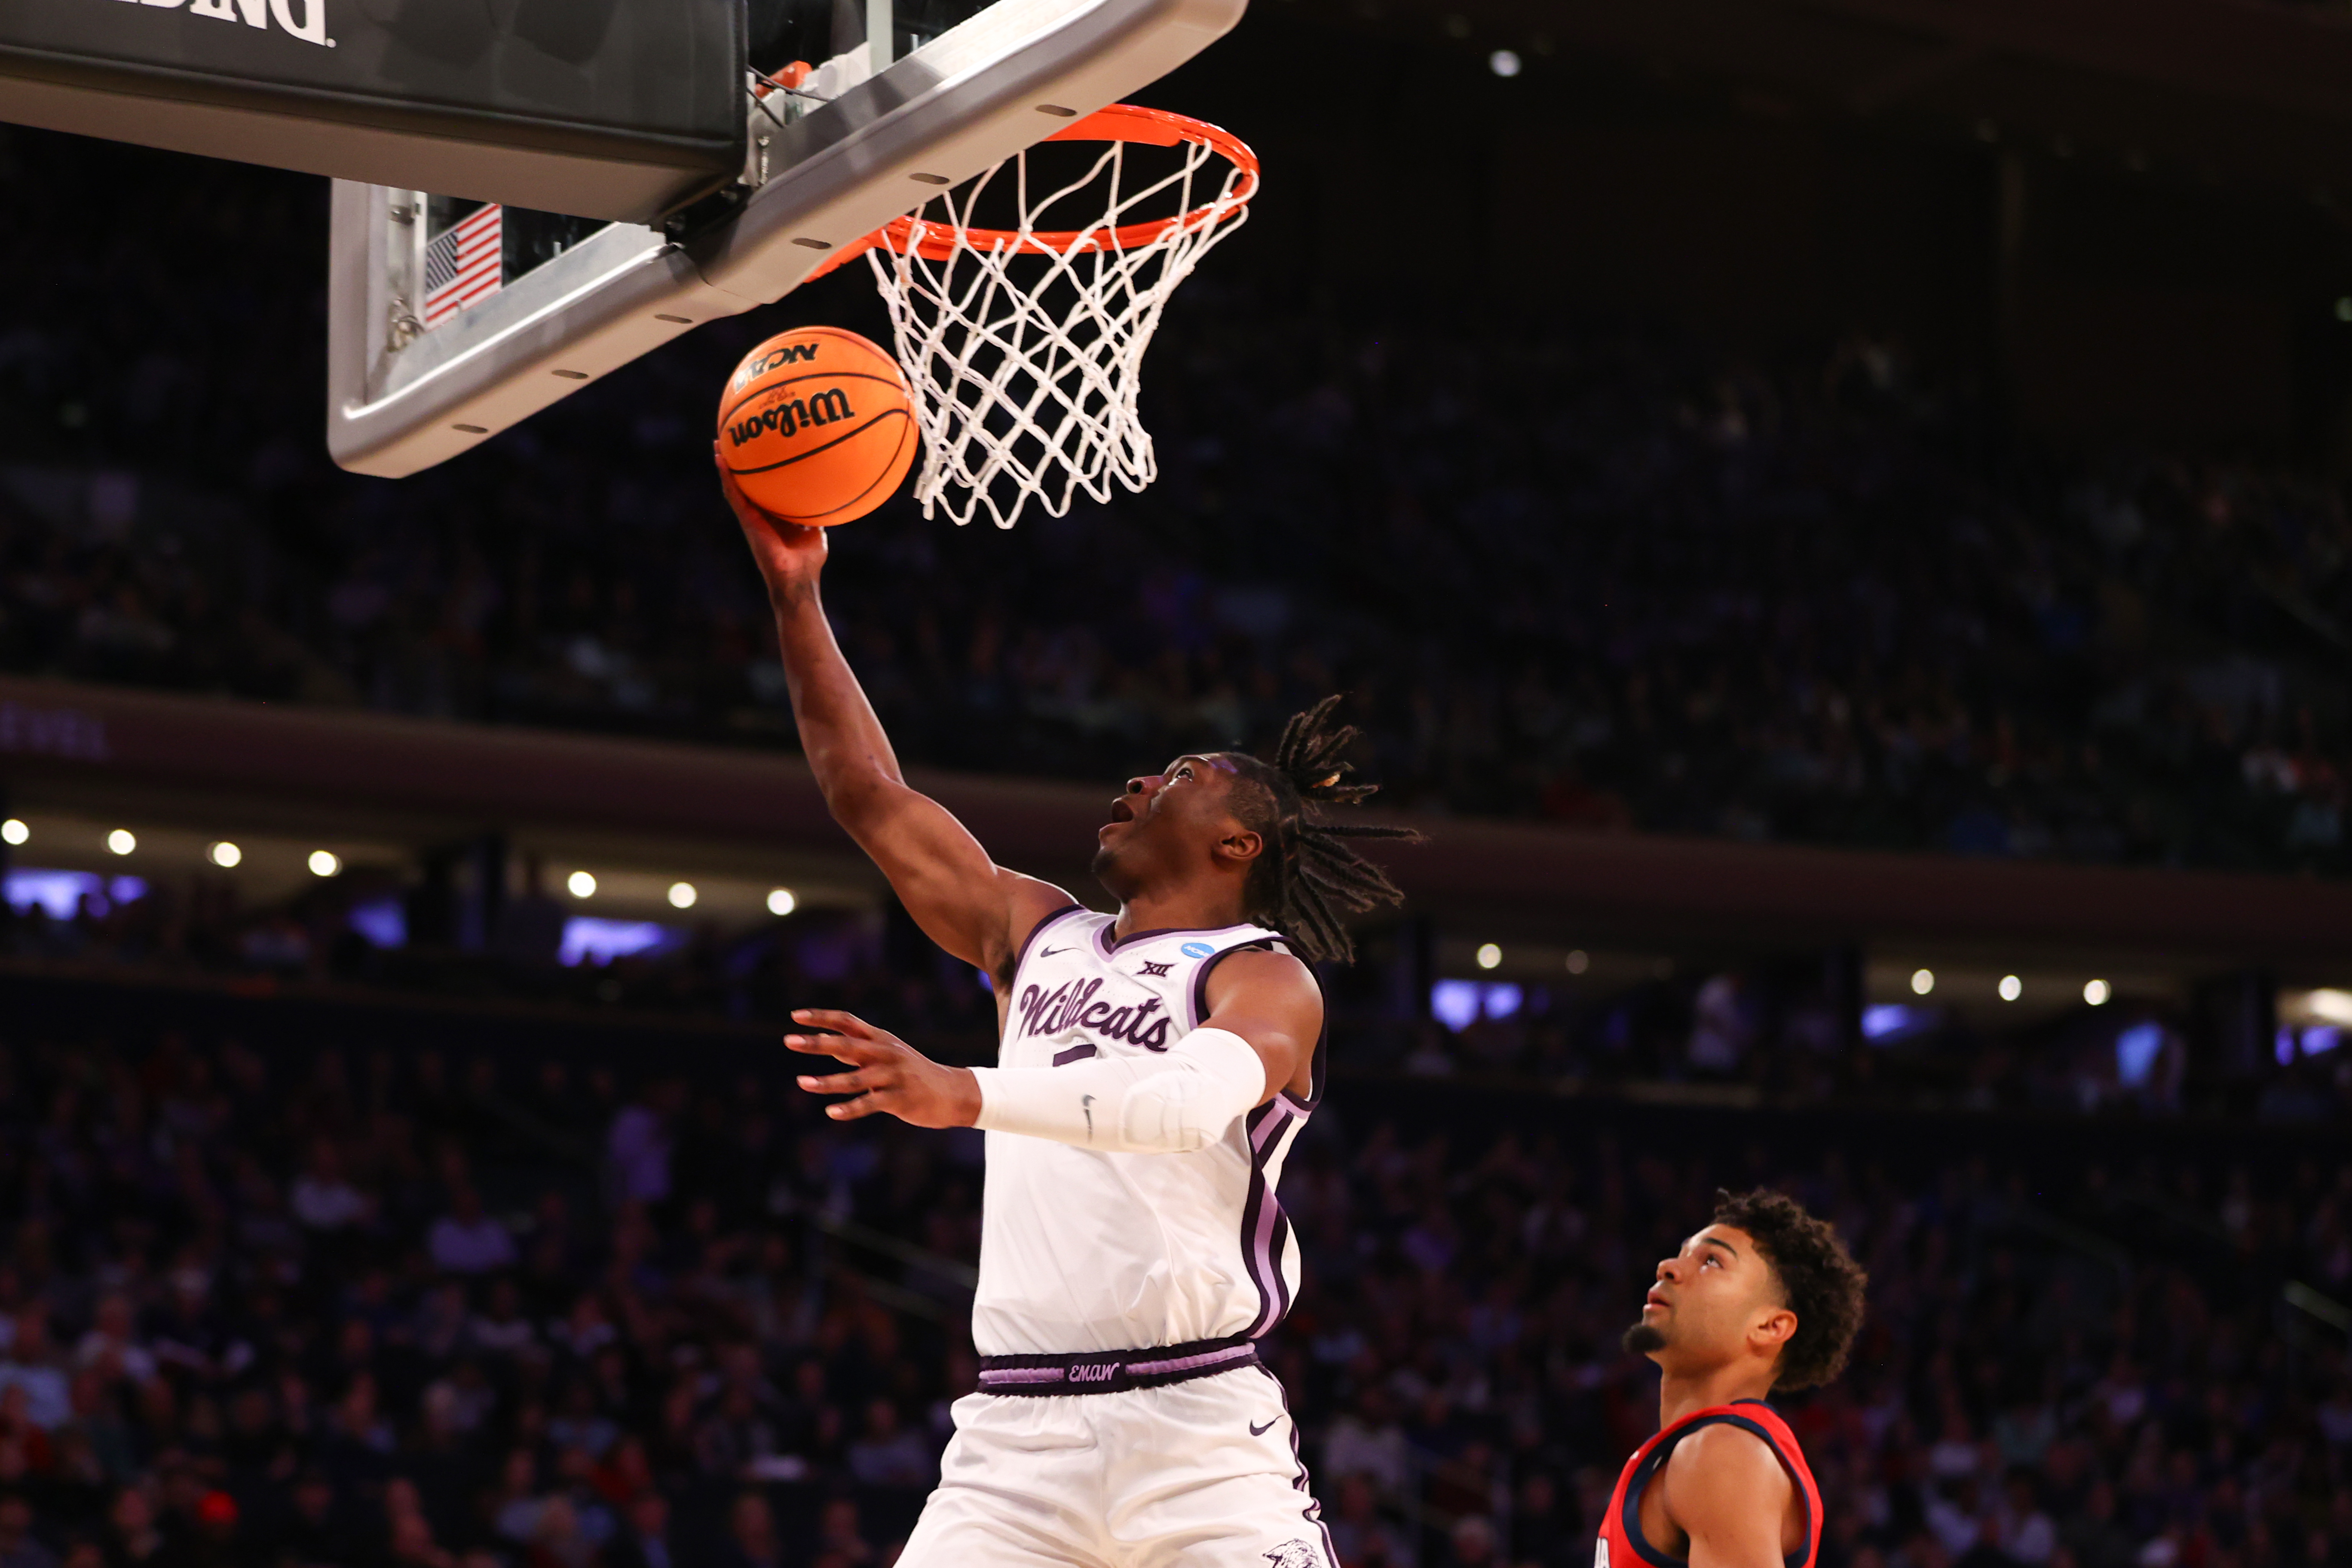 Cam Carter #5 of the Kansas State Wildcats puts up a layup during the first half of the game against the Florida Atlantic Owls during the Elite Eight round of the 2023 NCAA Men’s Basketball Tournament held at Madison Square Garden on March 25, 2023 in New York City.